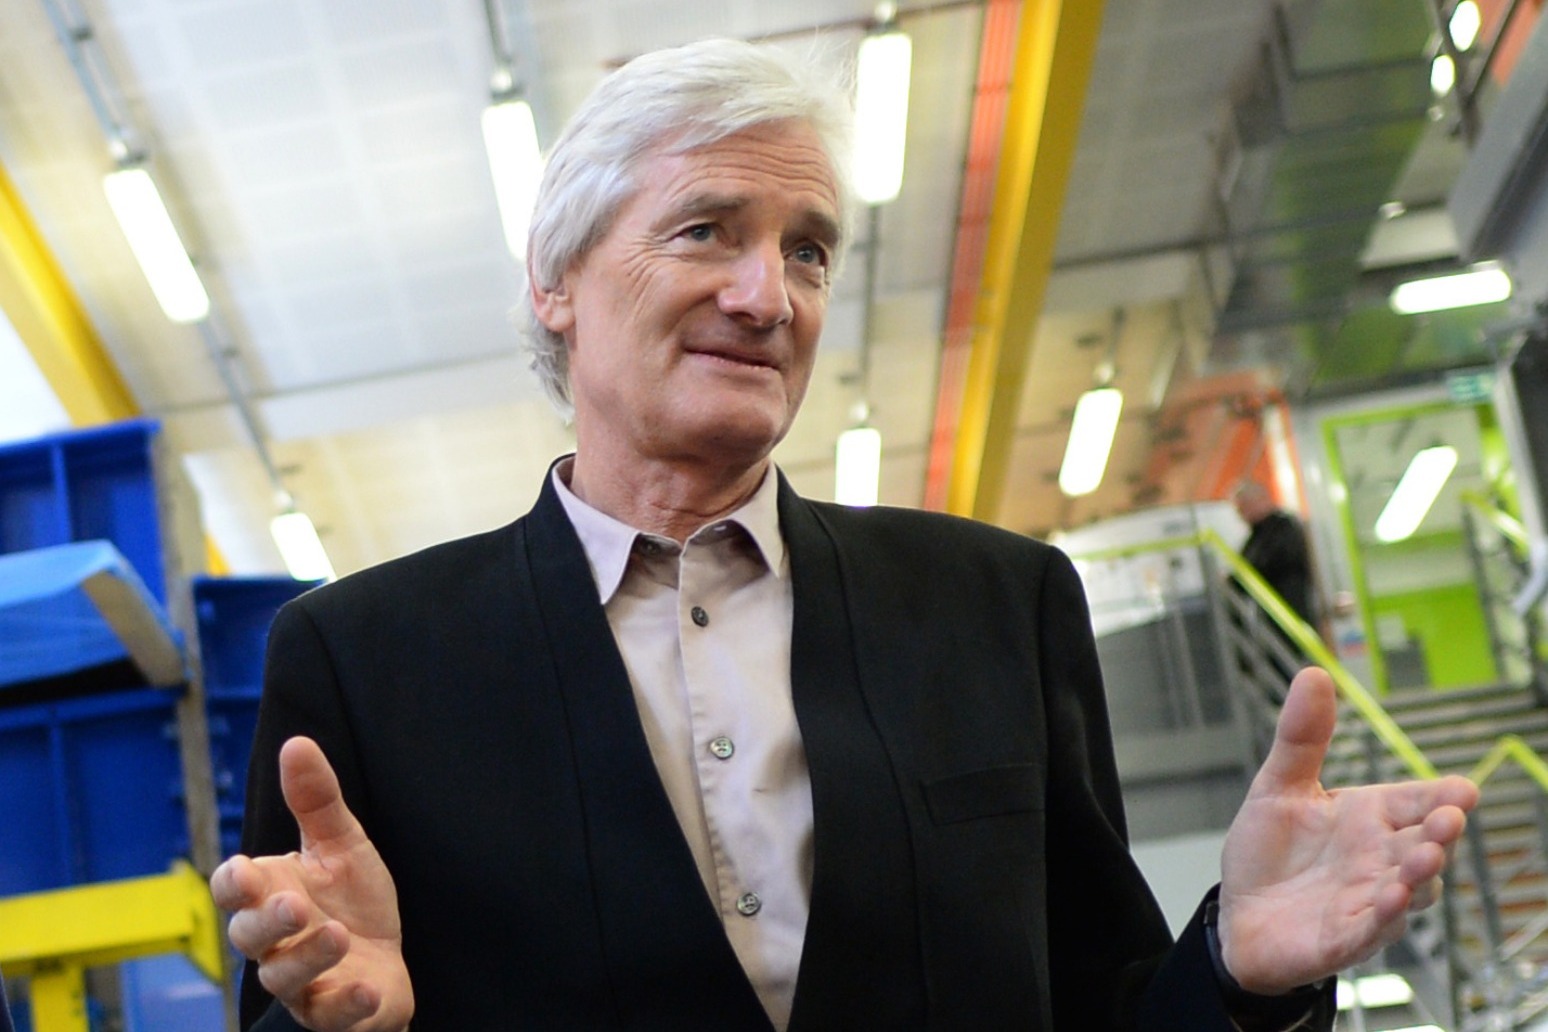 Dyson denies trying to ‘extract favours’ from Johnson 